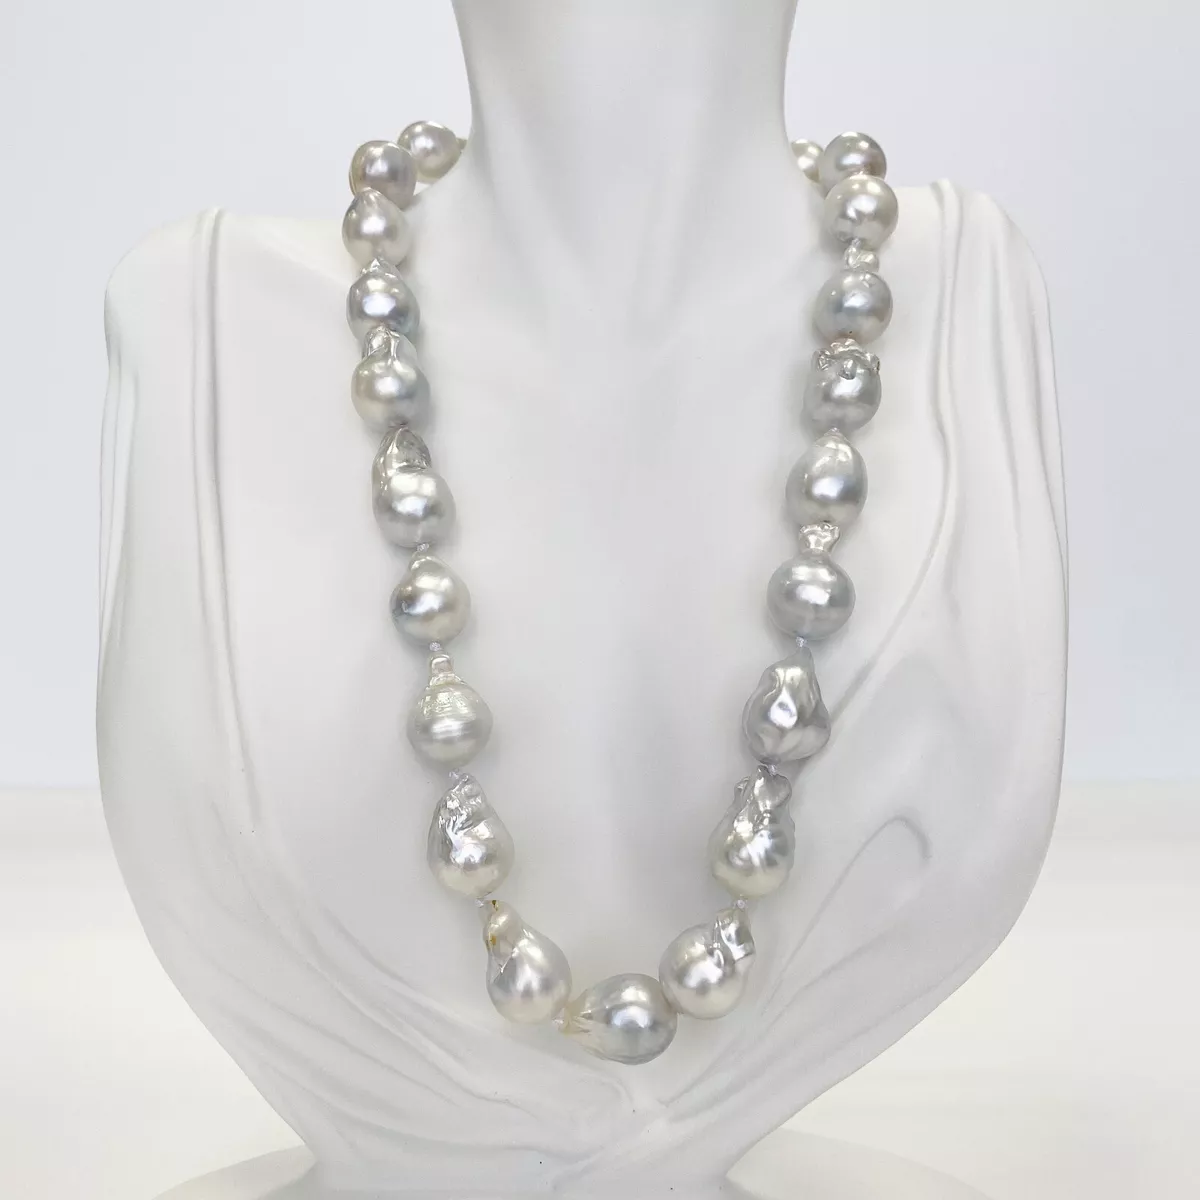 White South Sea Pearl Necklace Strand 12mm-13mm Baroque Pearls Silver Clasp  18